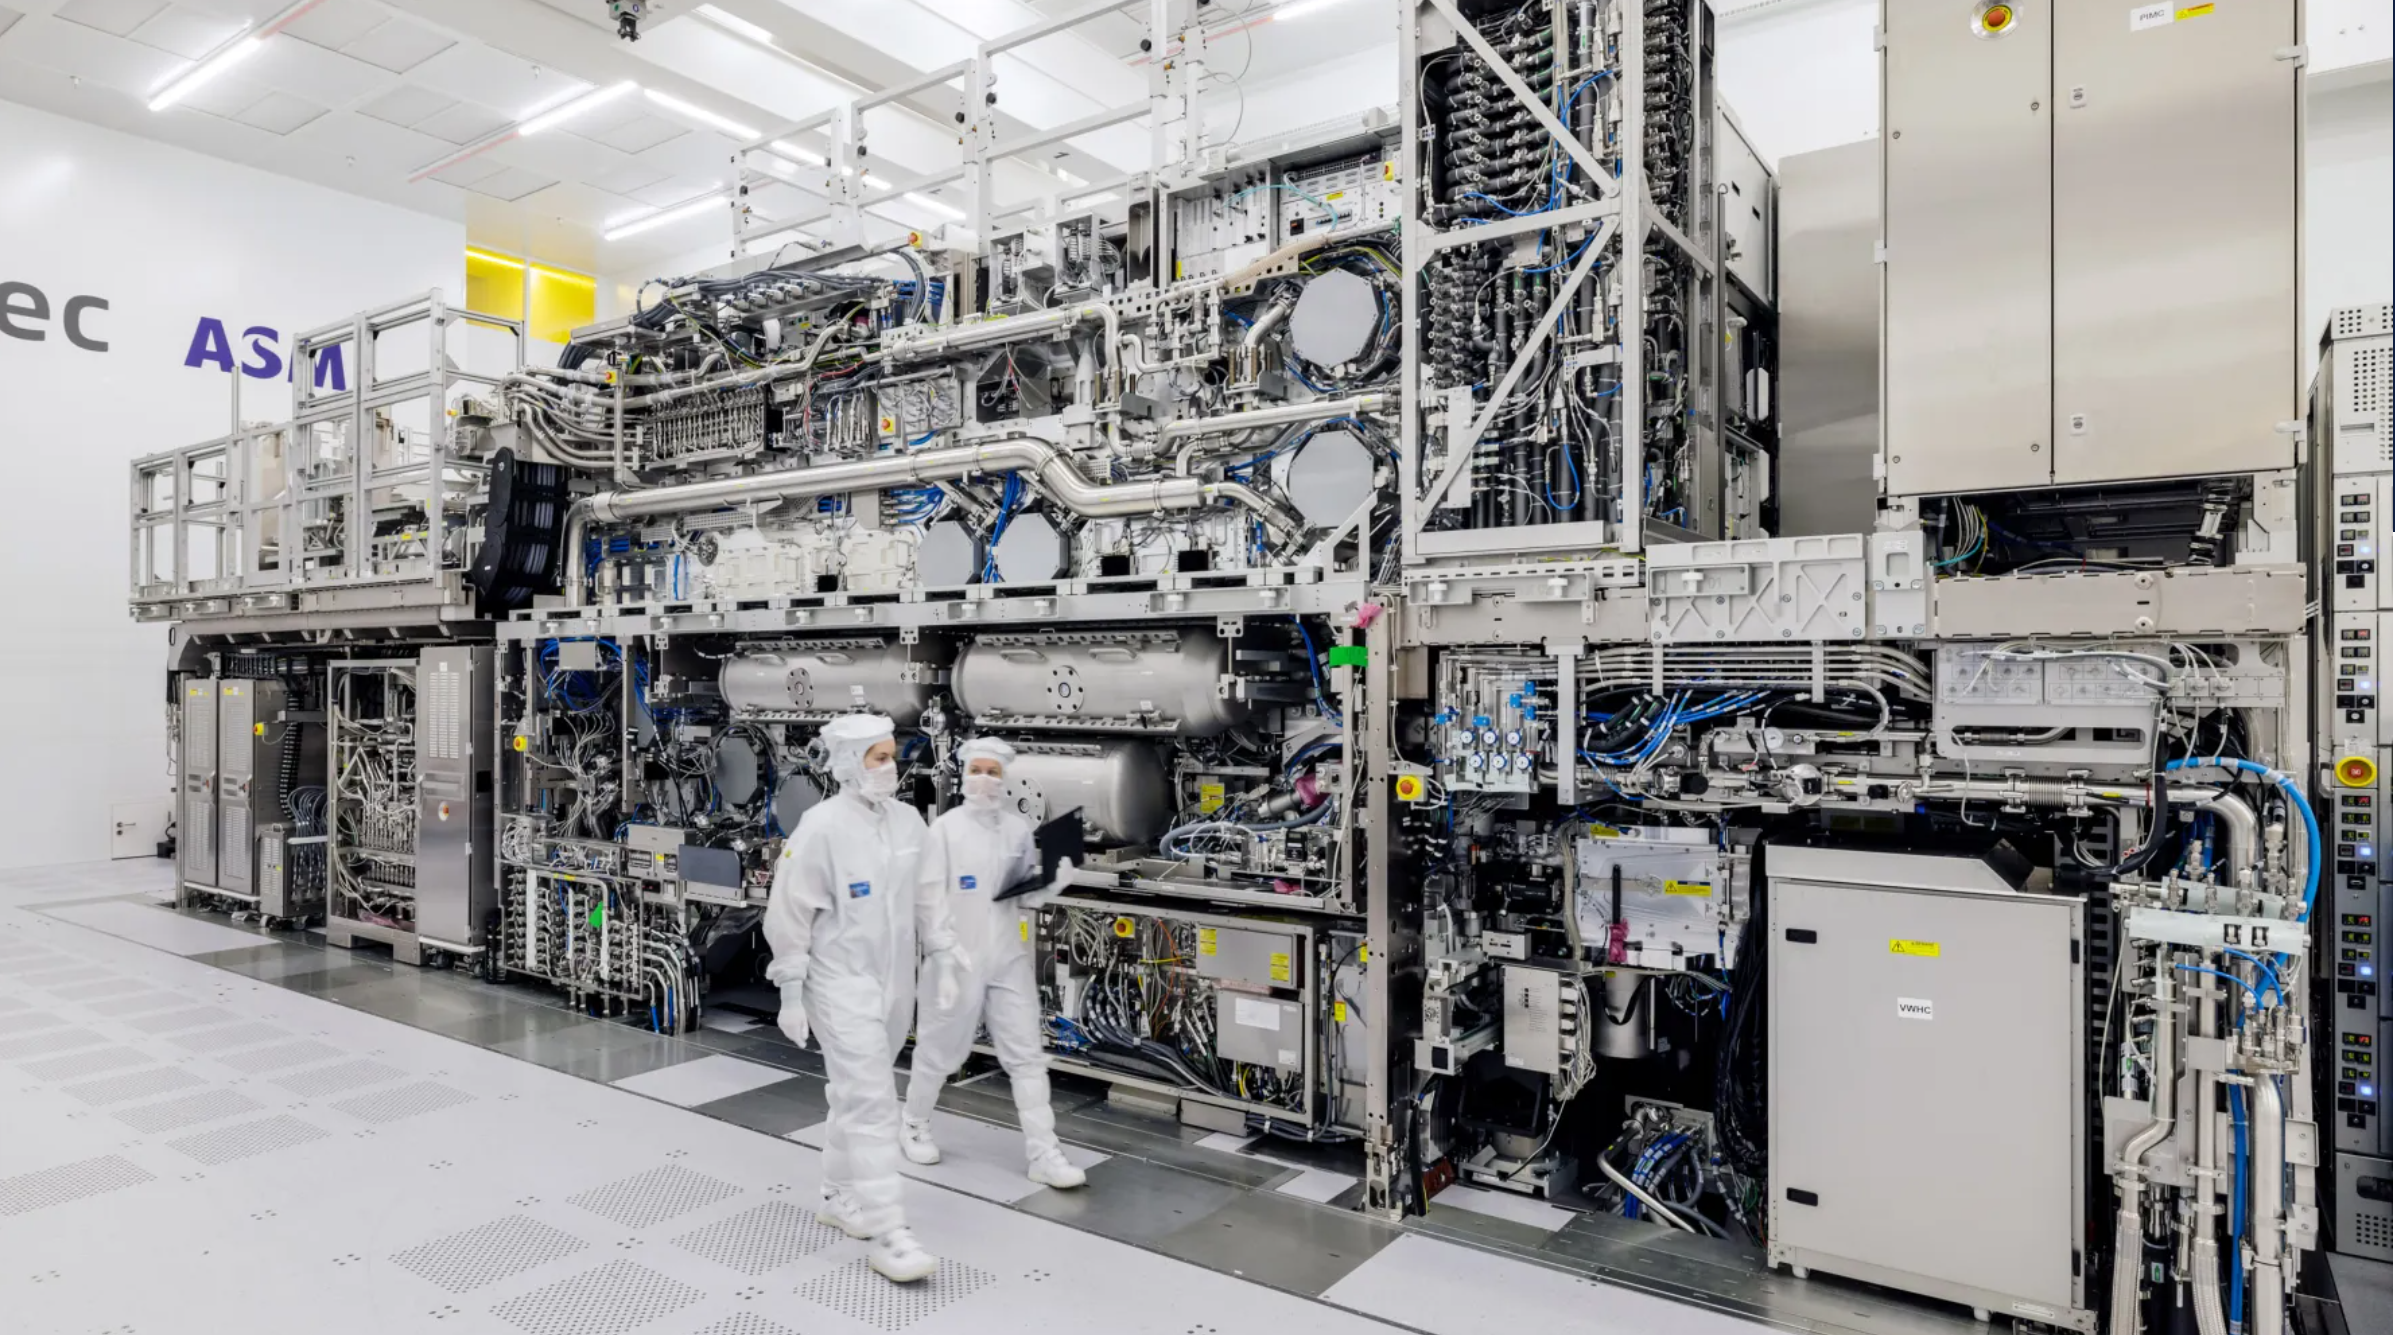 ASML: Pioneering the Future of Semiconductor Manufacturing